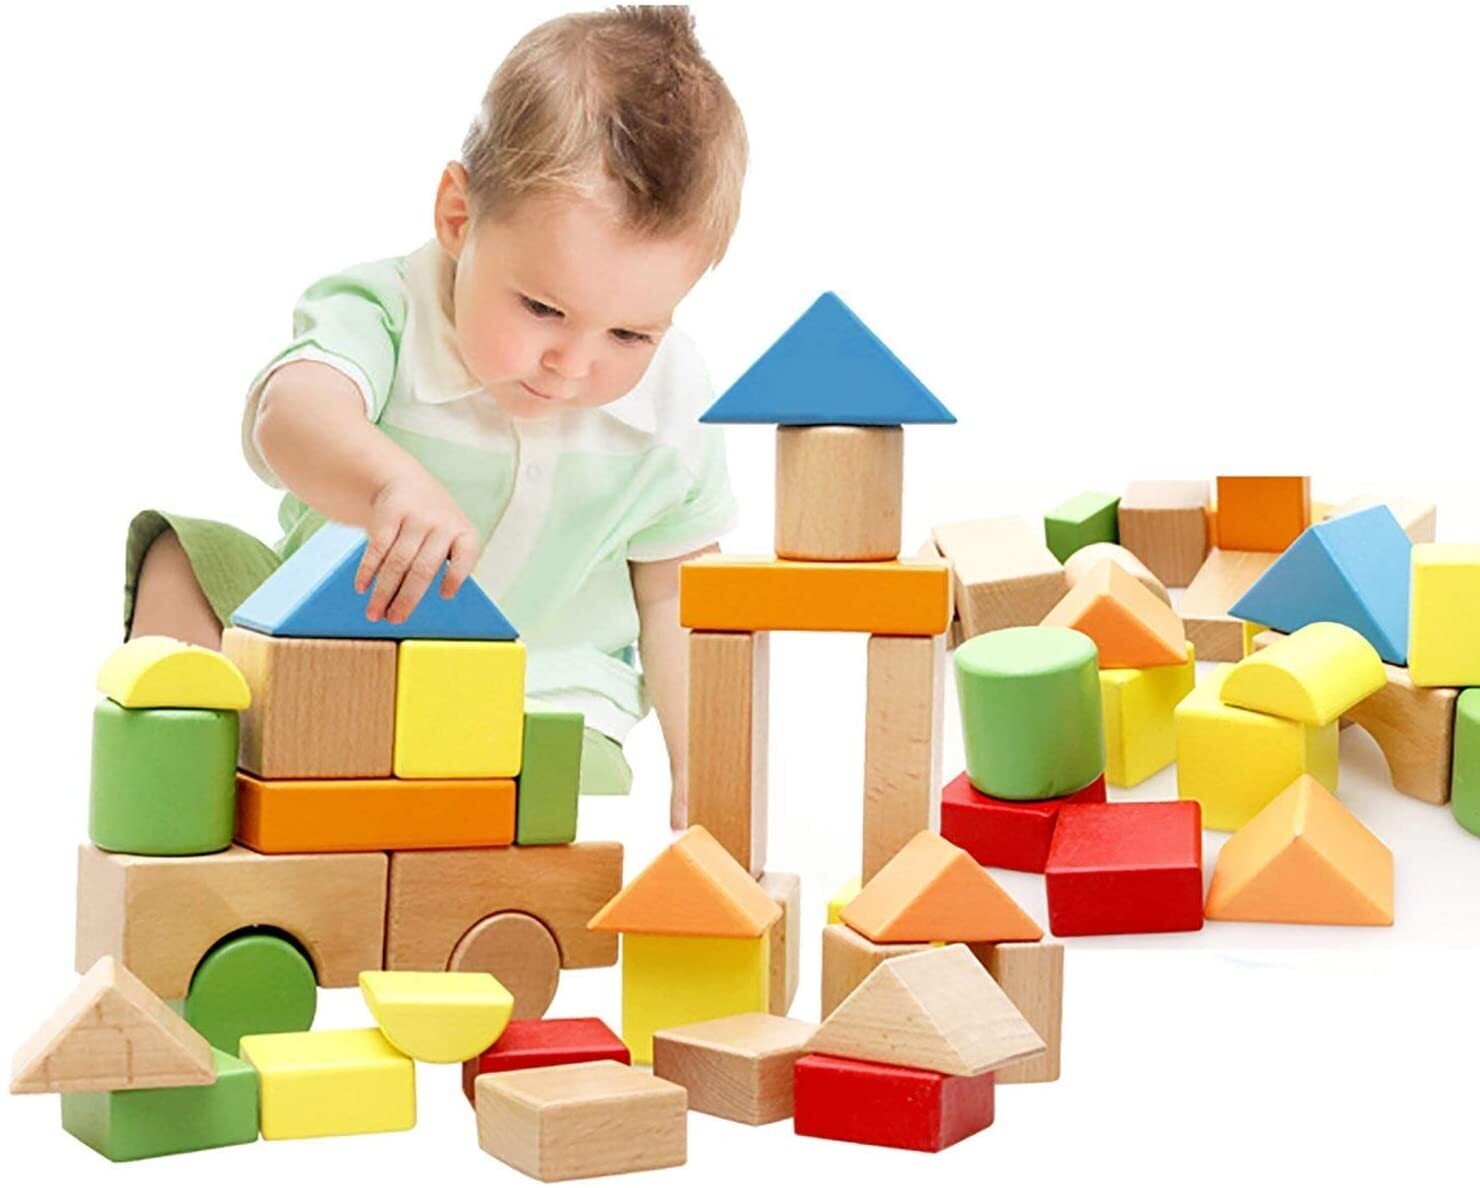 Colorful wooden building blocks toy for children